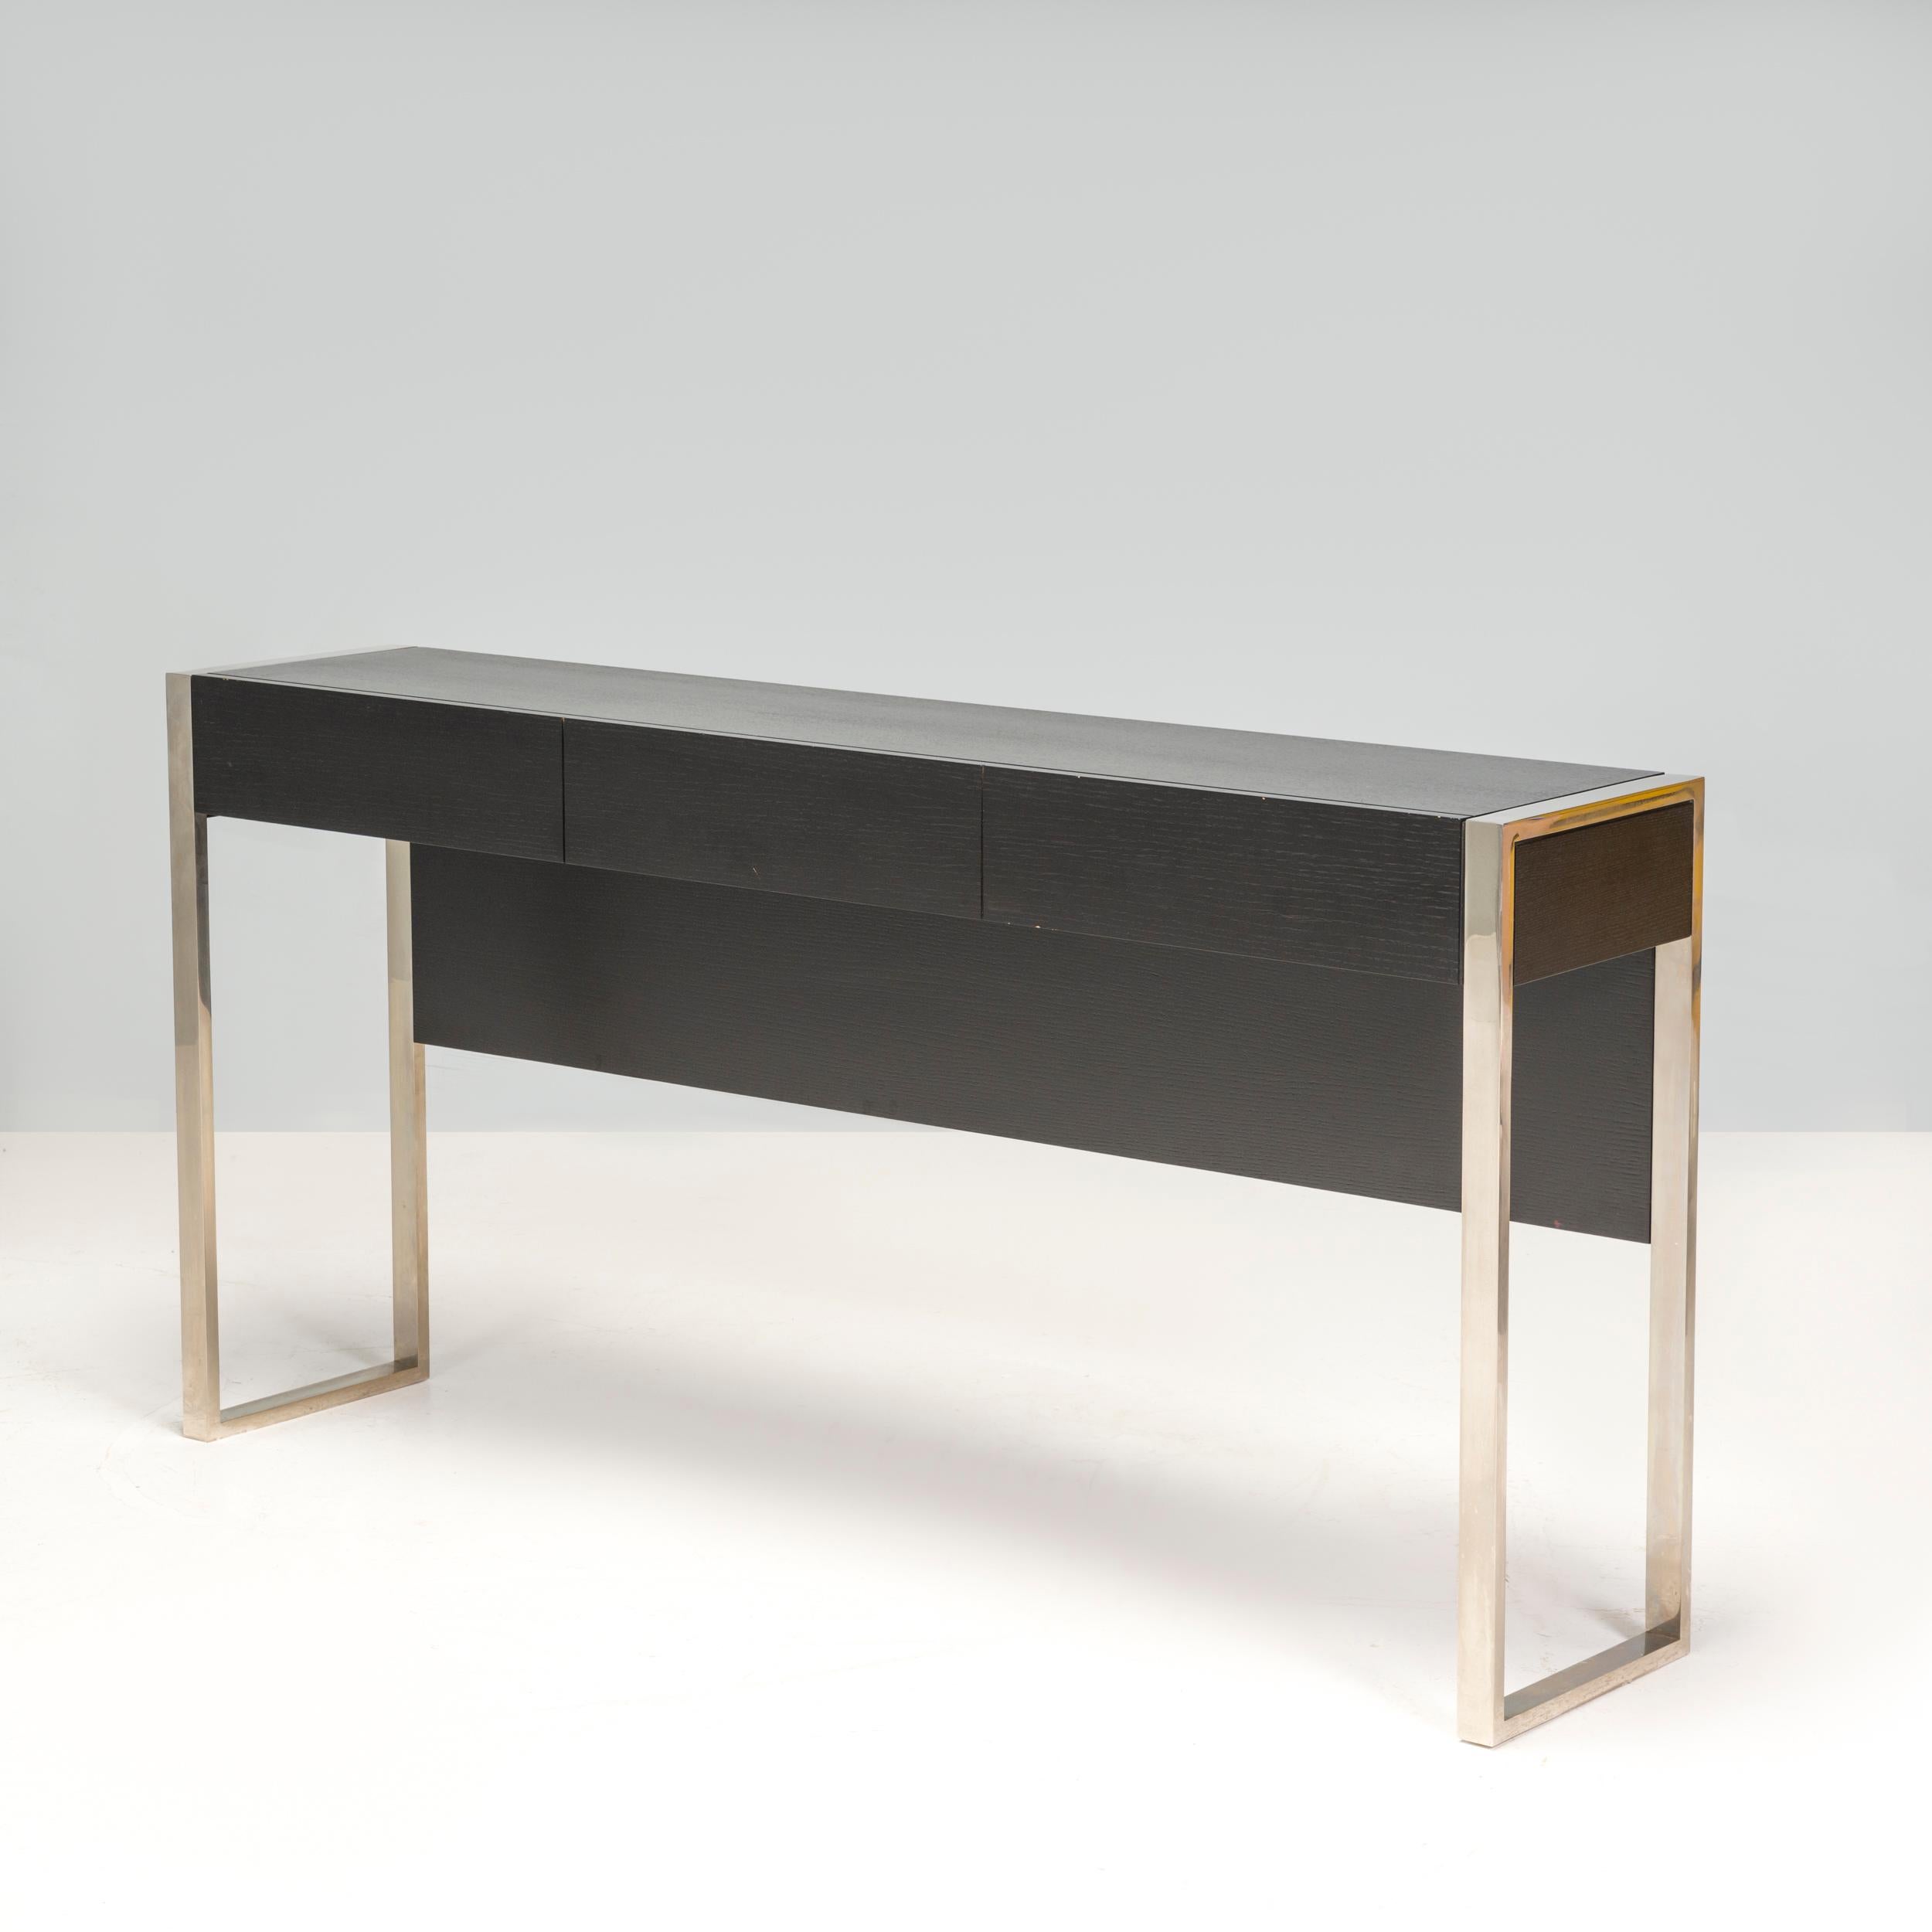 Casually sophisticated with a modern minimalist aesthetic, this bespoke console table is made from dark wood and sleek metal legs for a contrasting finish. There is an engaging interplay of geometric shapes and levels.

The unique drop-down panel is